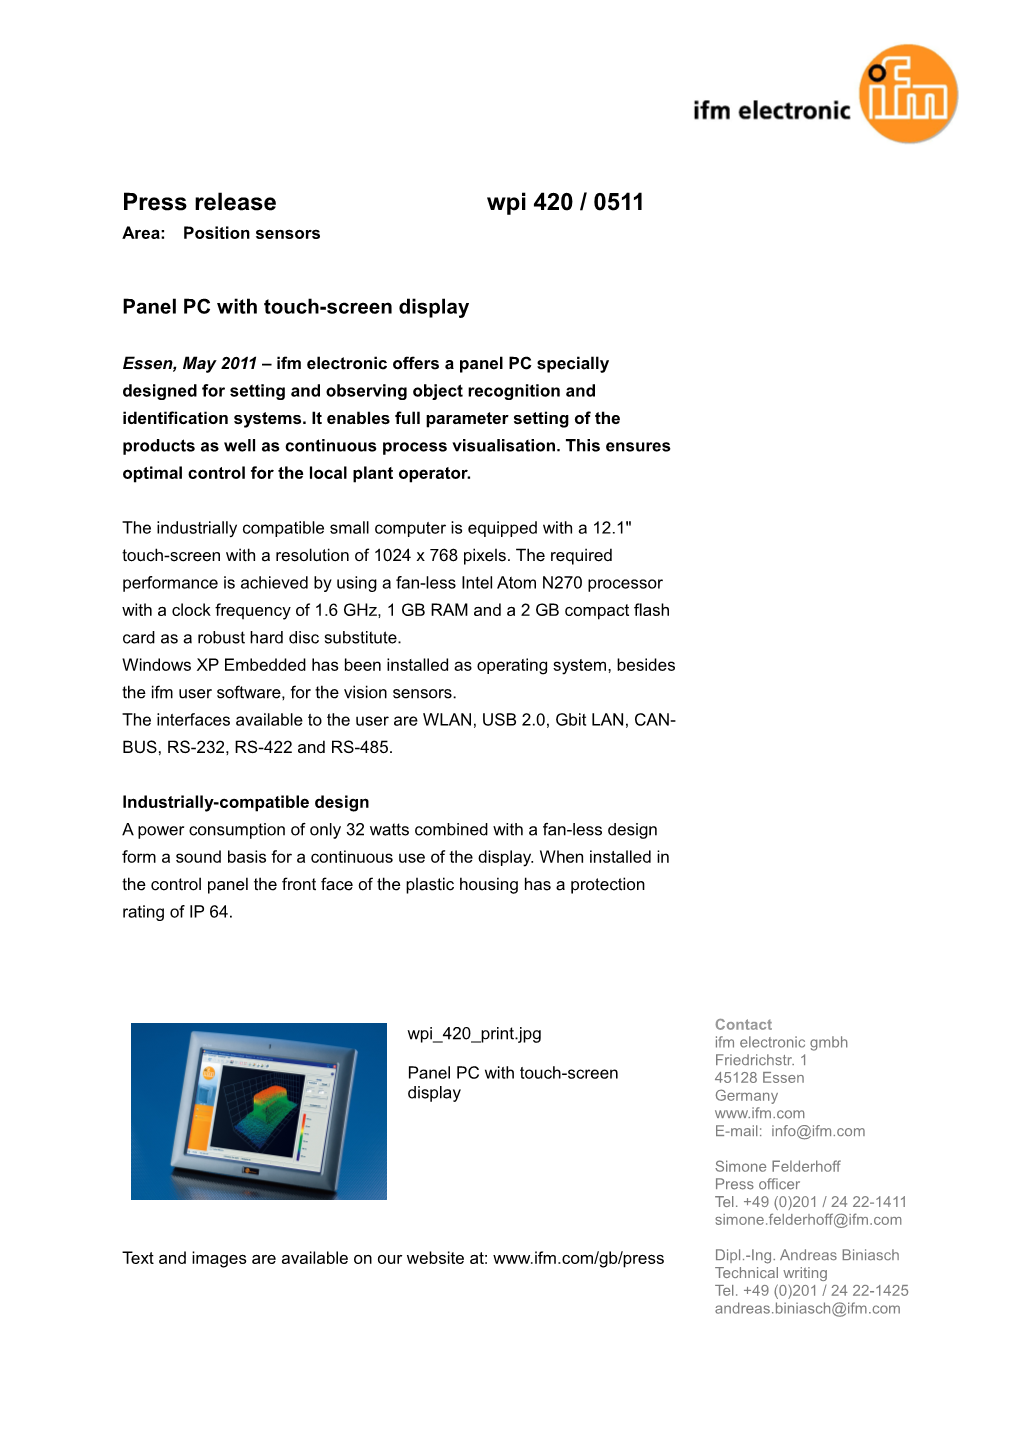 Press Release Ifm Electronic - Panel PC with Touch-Screen Display